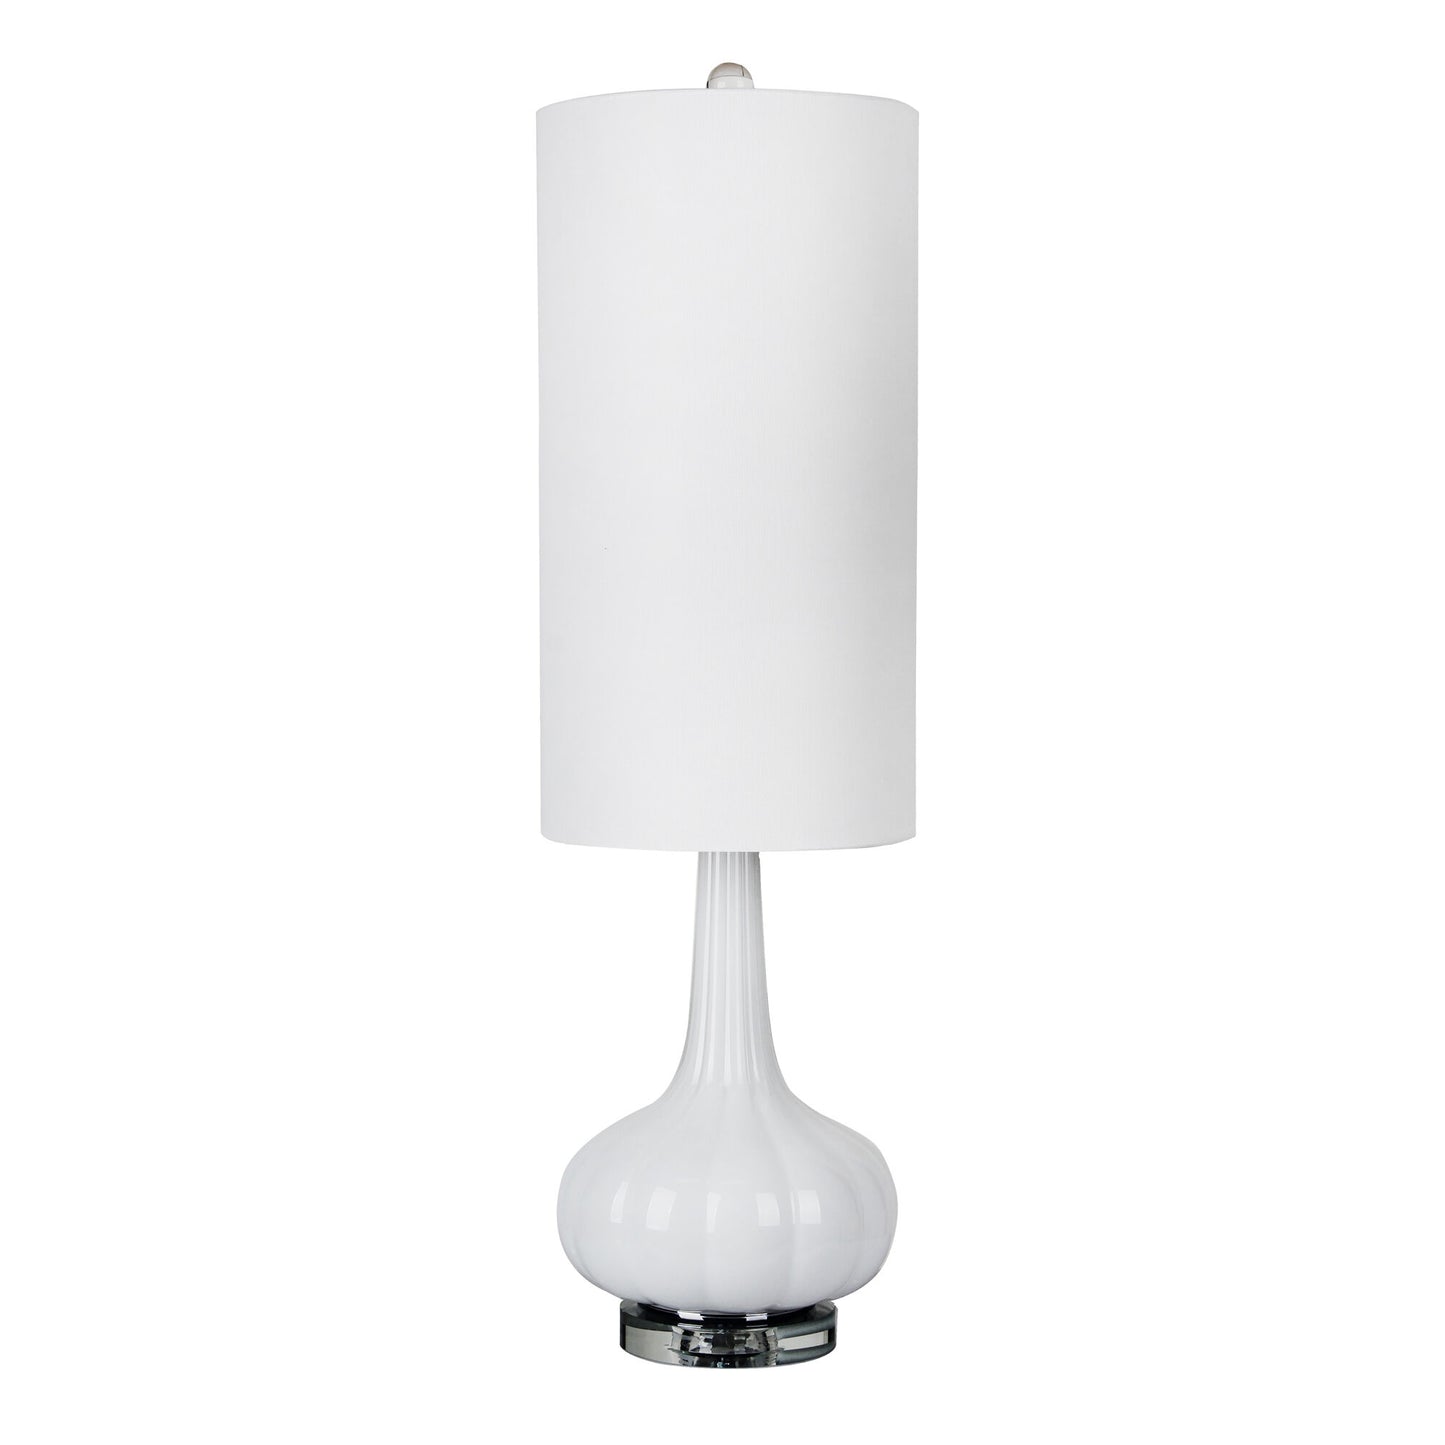 36 Glass Inch Genie Table Lamp White